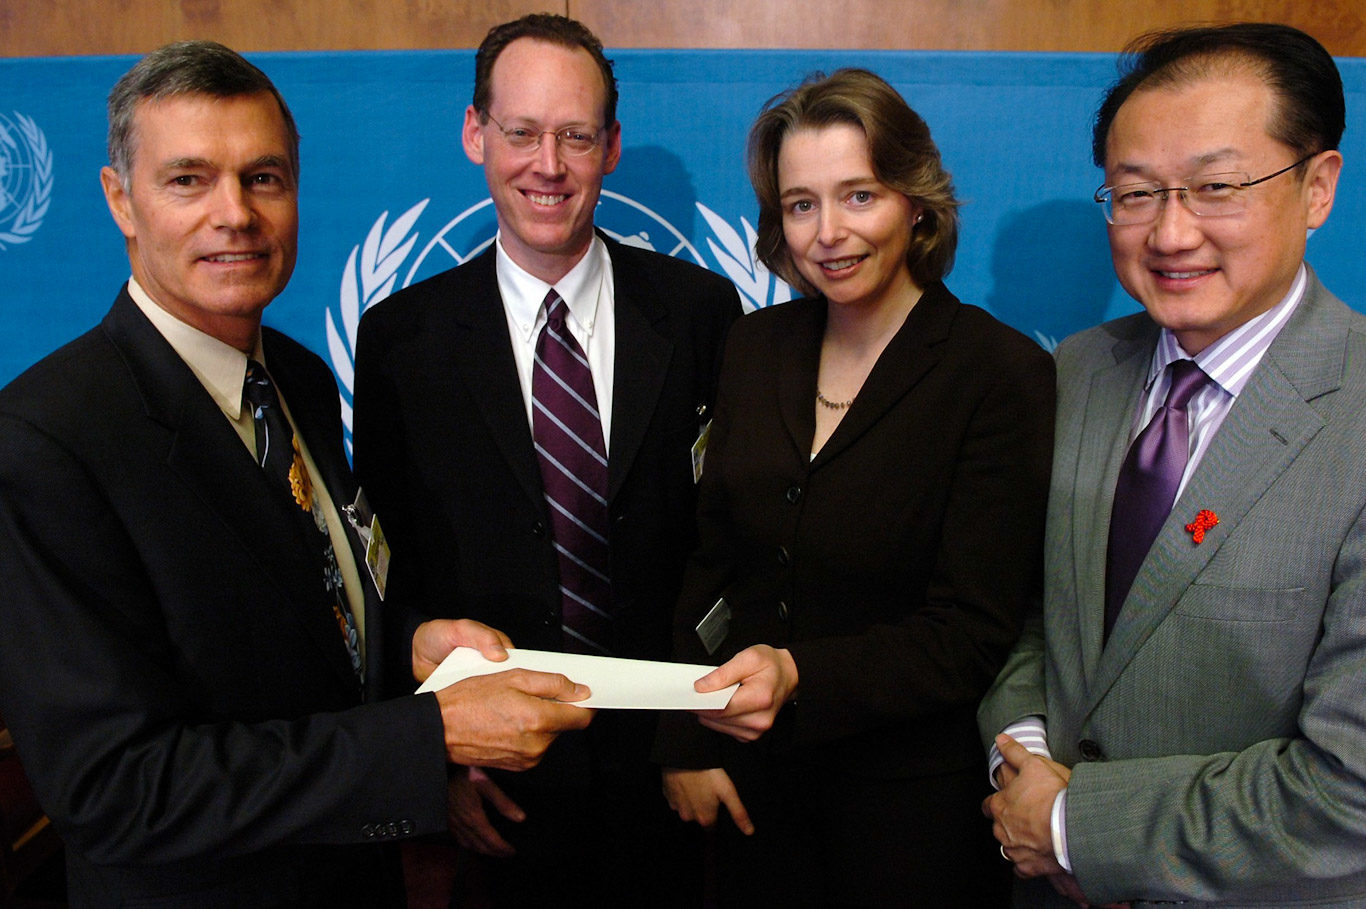 From left to right: Steven Hilton, Paul Farmer, Ophelia Dahl and Jim Yong Kim at the United Nations in Geneva, Switzerland, Oct. 31, 2005.